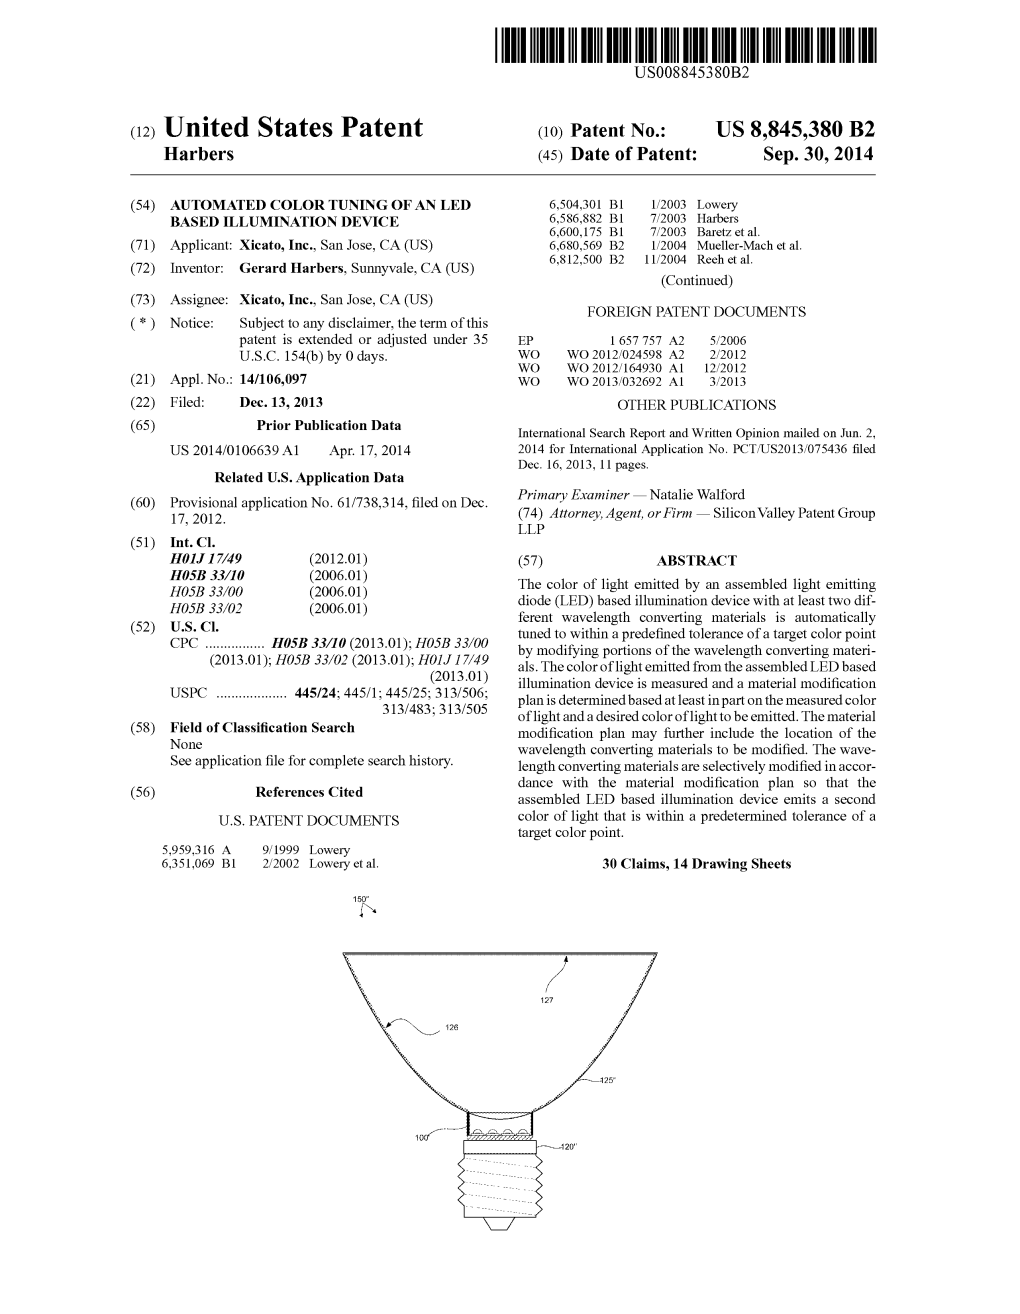 (12) United States Patent (10) Patent No.: US 8,845,380 B2 Harbers (45) Date of Patent: Sep